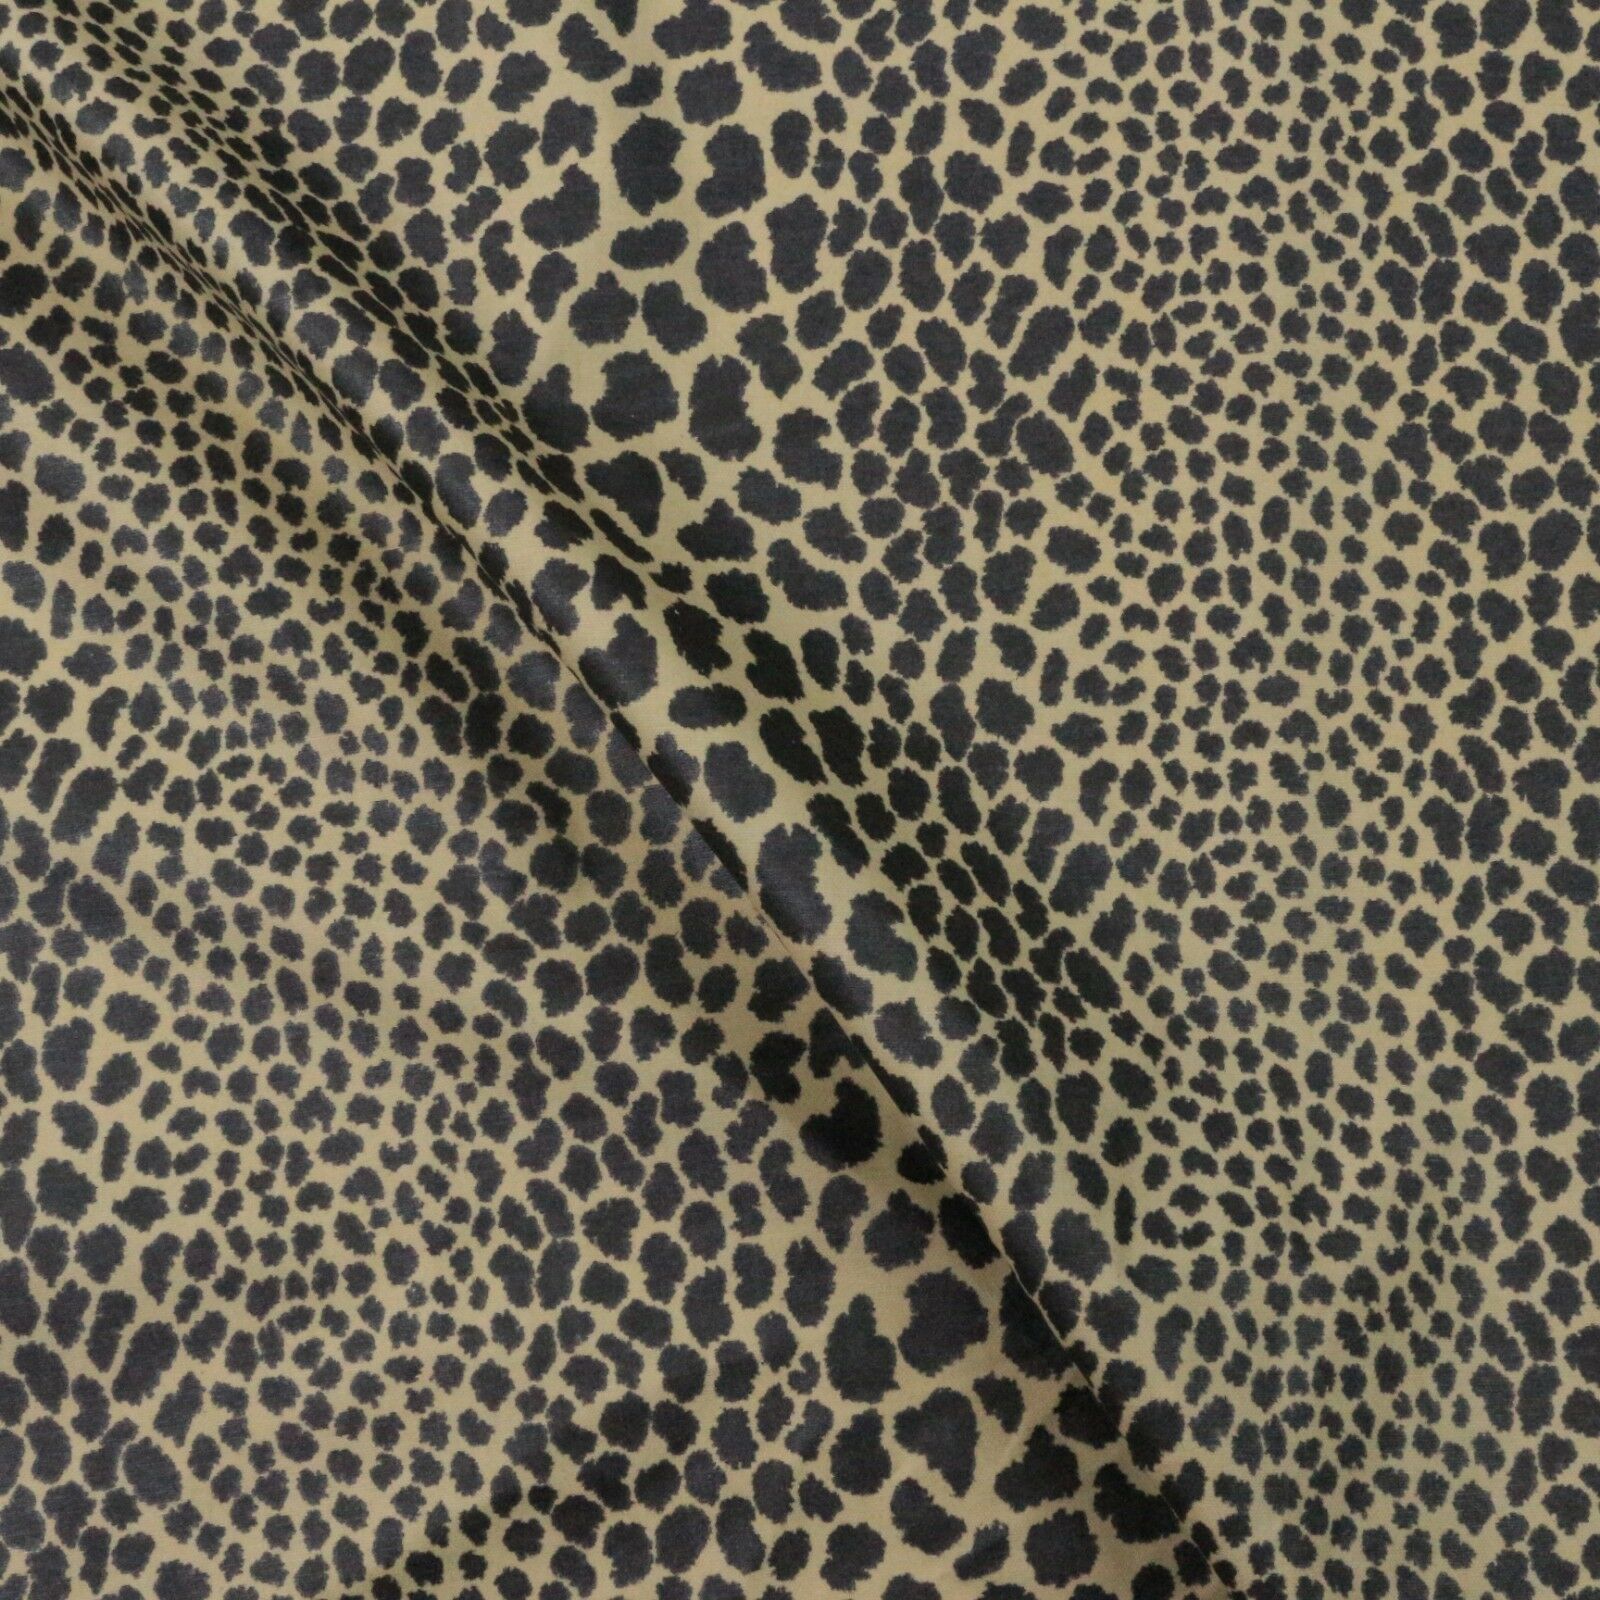 Primary image for P KAUFMANN LIMELIGHT BLACK PEARL CHEETAH CHINTZ MULTIPURPOSE FABRIC BY YARD 54"W